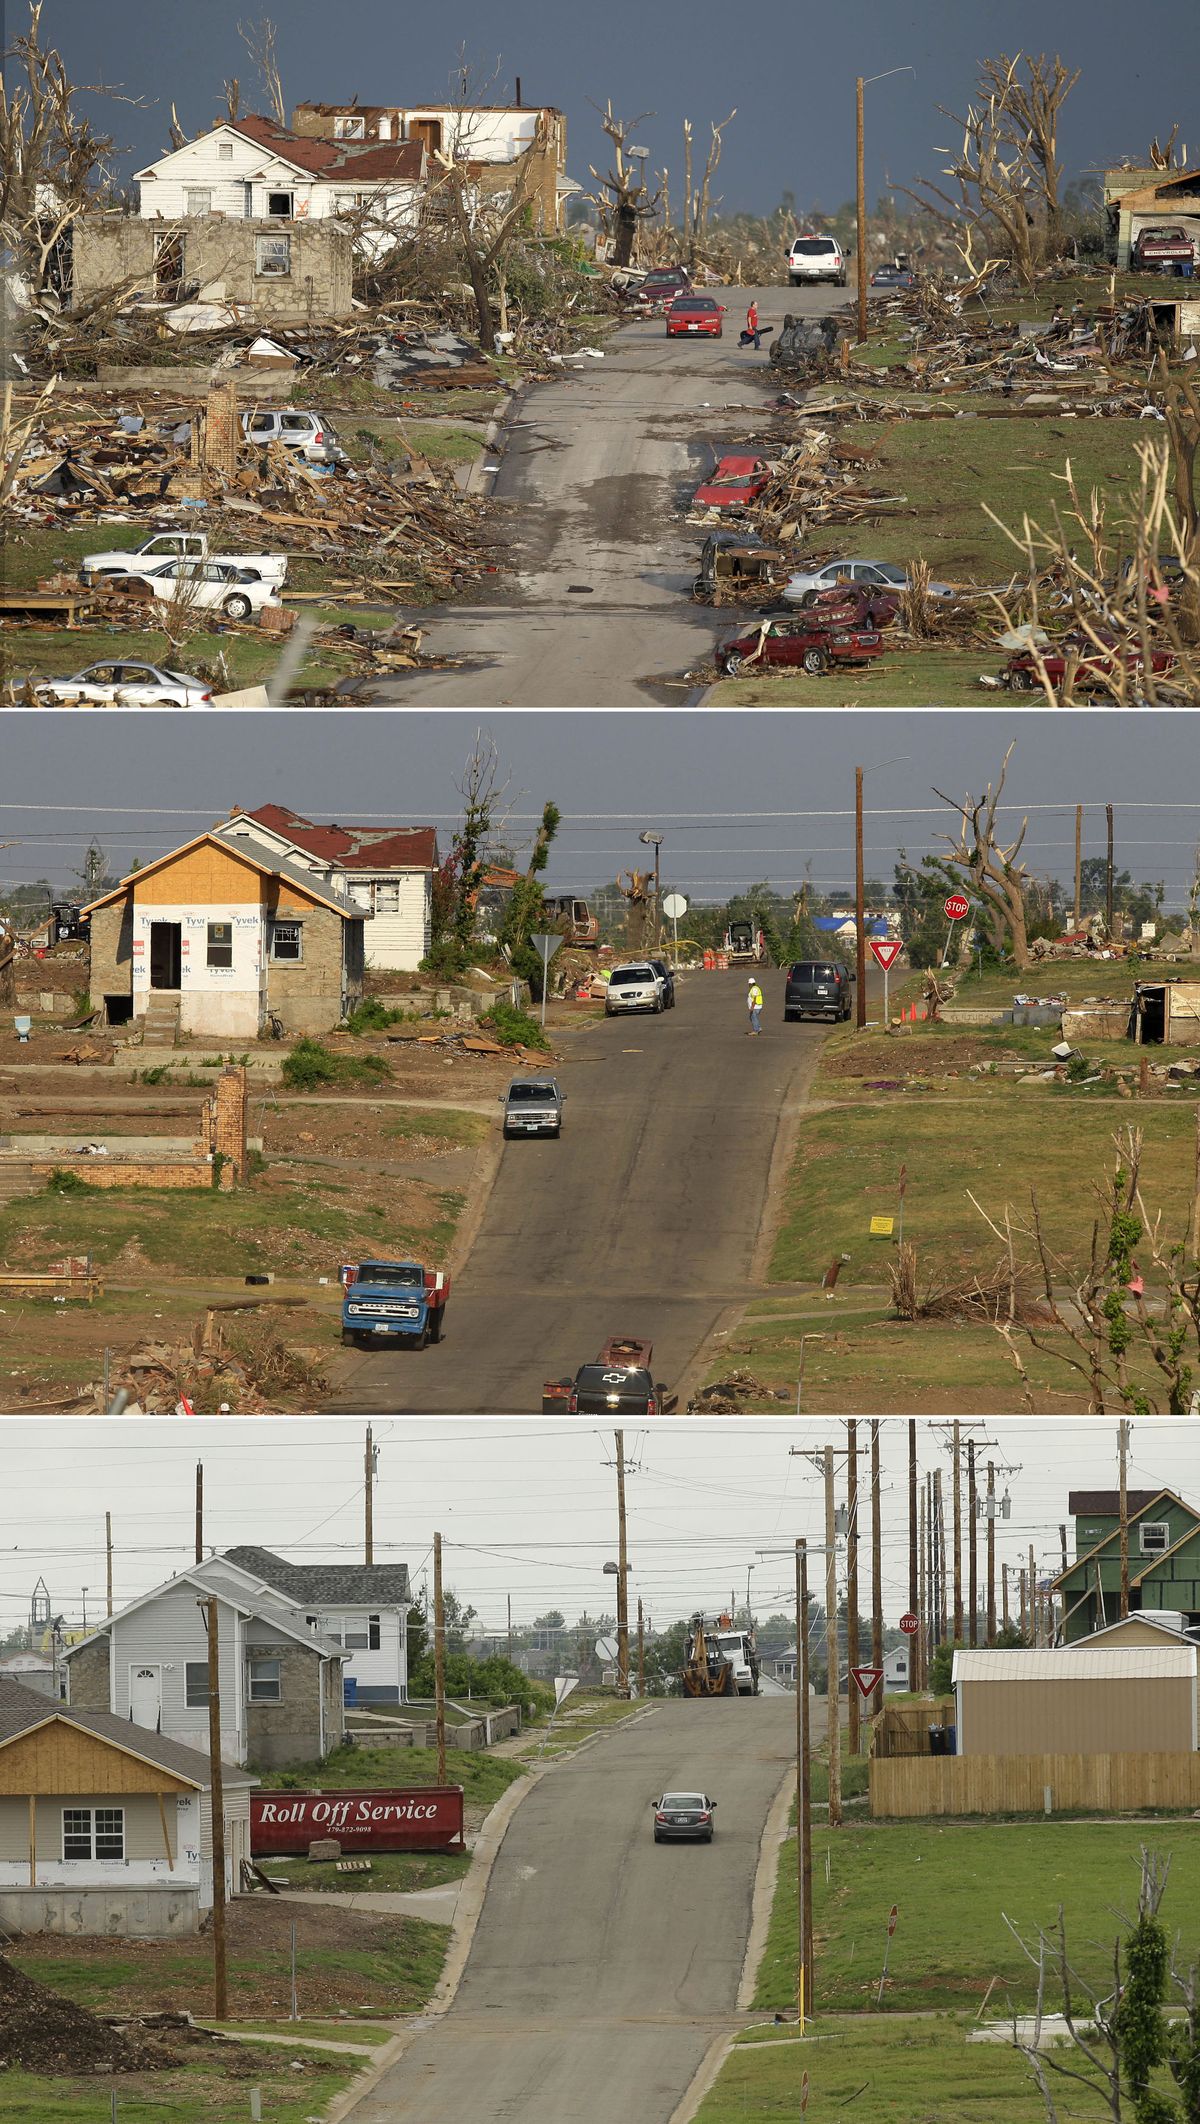 This three-photo combo shows a scene taken on May 23, 2011, top, July 21, 2011, center, and May 7, 2012, bottom, shows progress made in Joplin, Mo. in the year after an EF-5 tornado destroyed a large swath of the city and killed 161 people. (AP/Charlie Riedel)